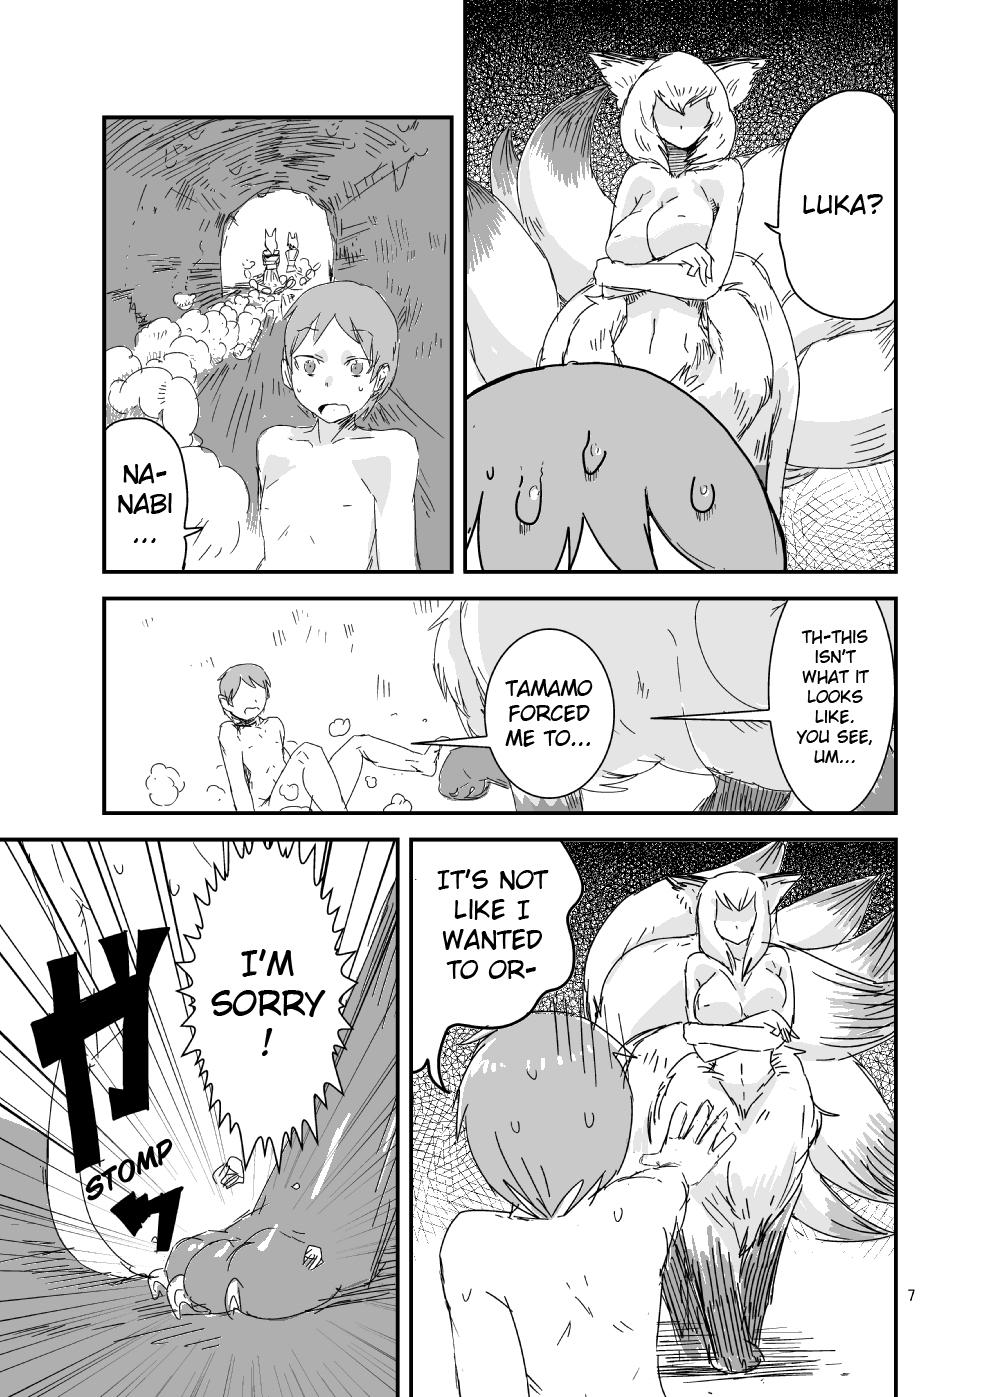 Blowjob Mon Musu Quest! Beyond The End - Monster girl quest Moms - Page 6